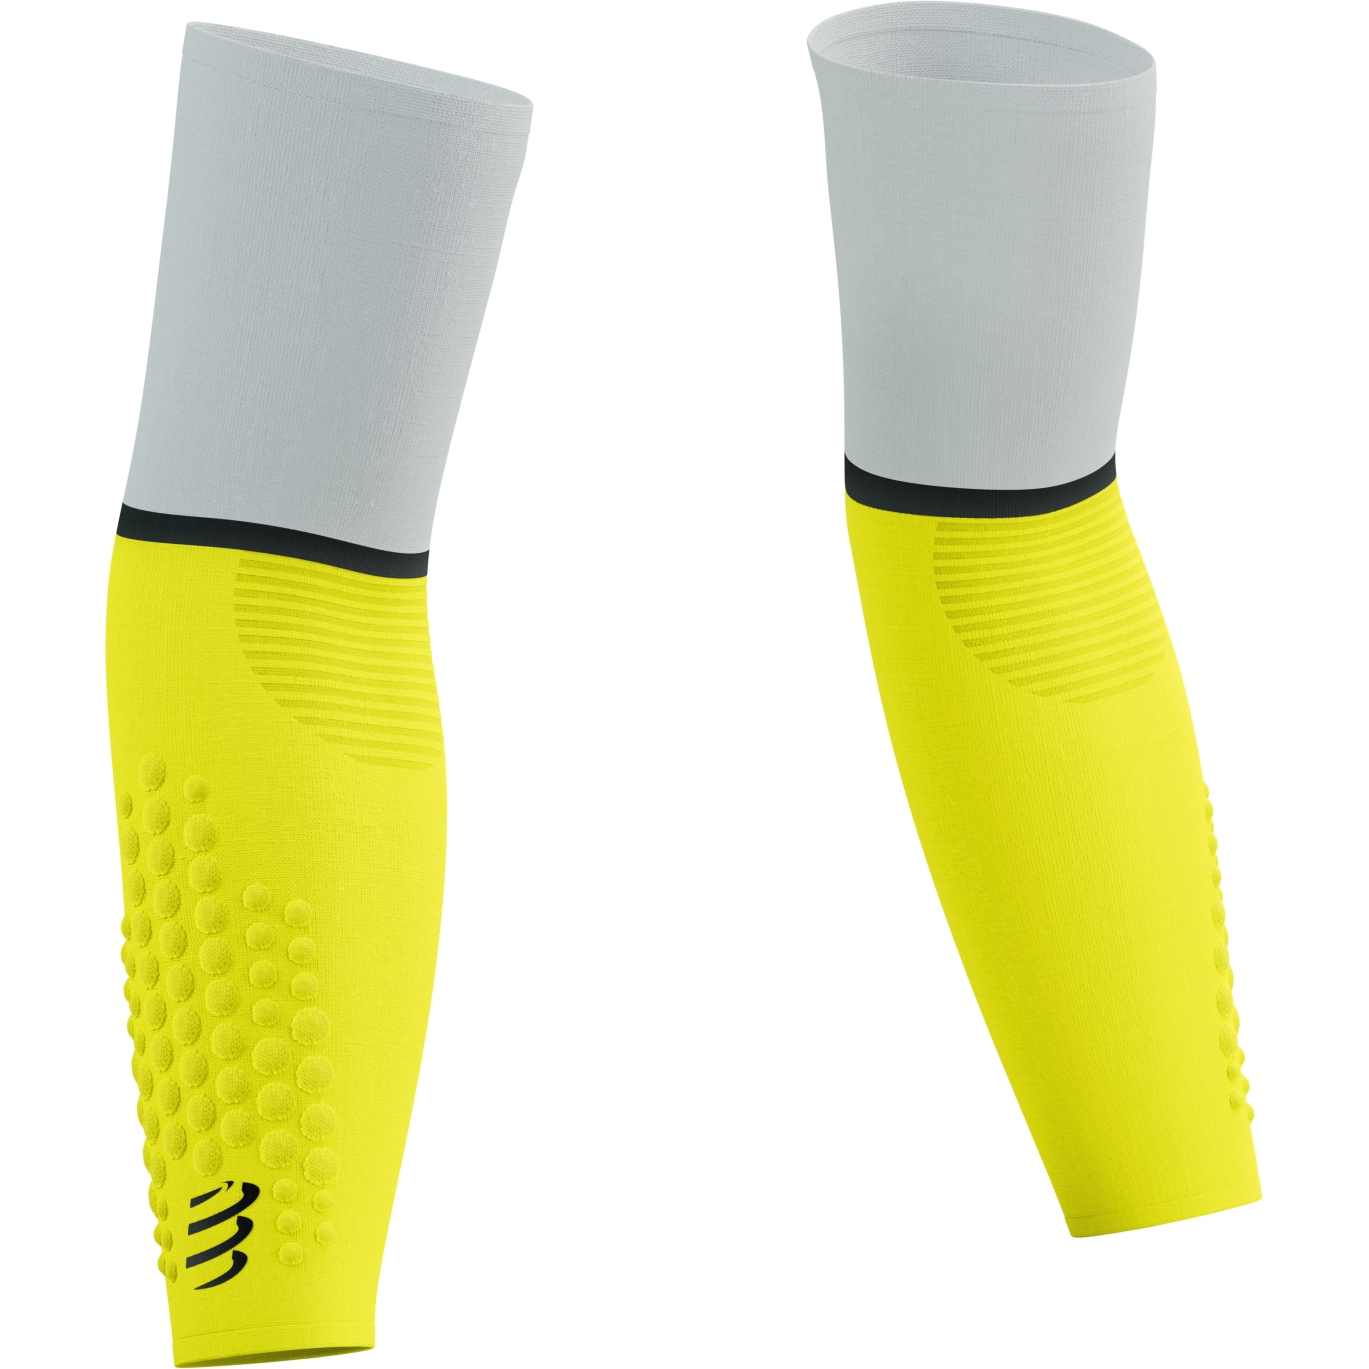 Productfoto van Compressport ArmForce Ultralight Compressie Armwarmers - white/safety yellow